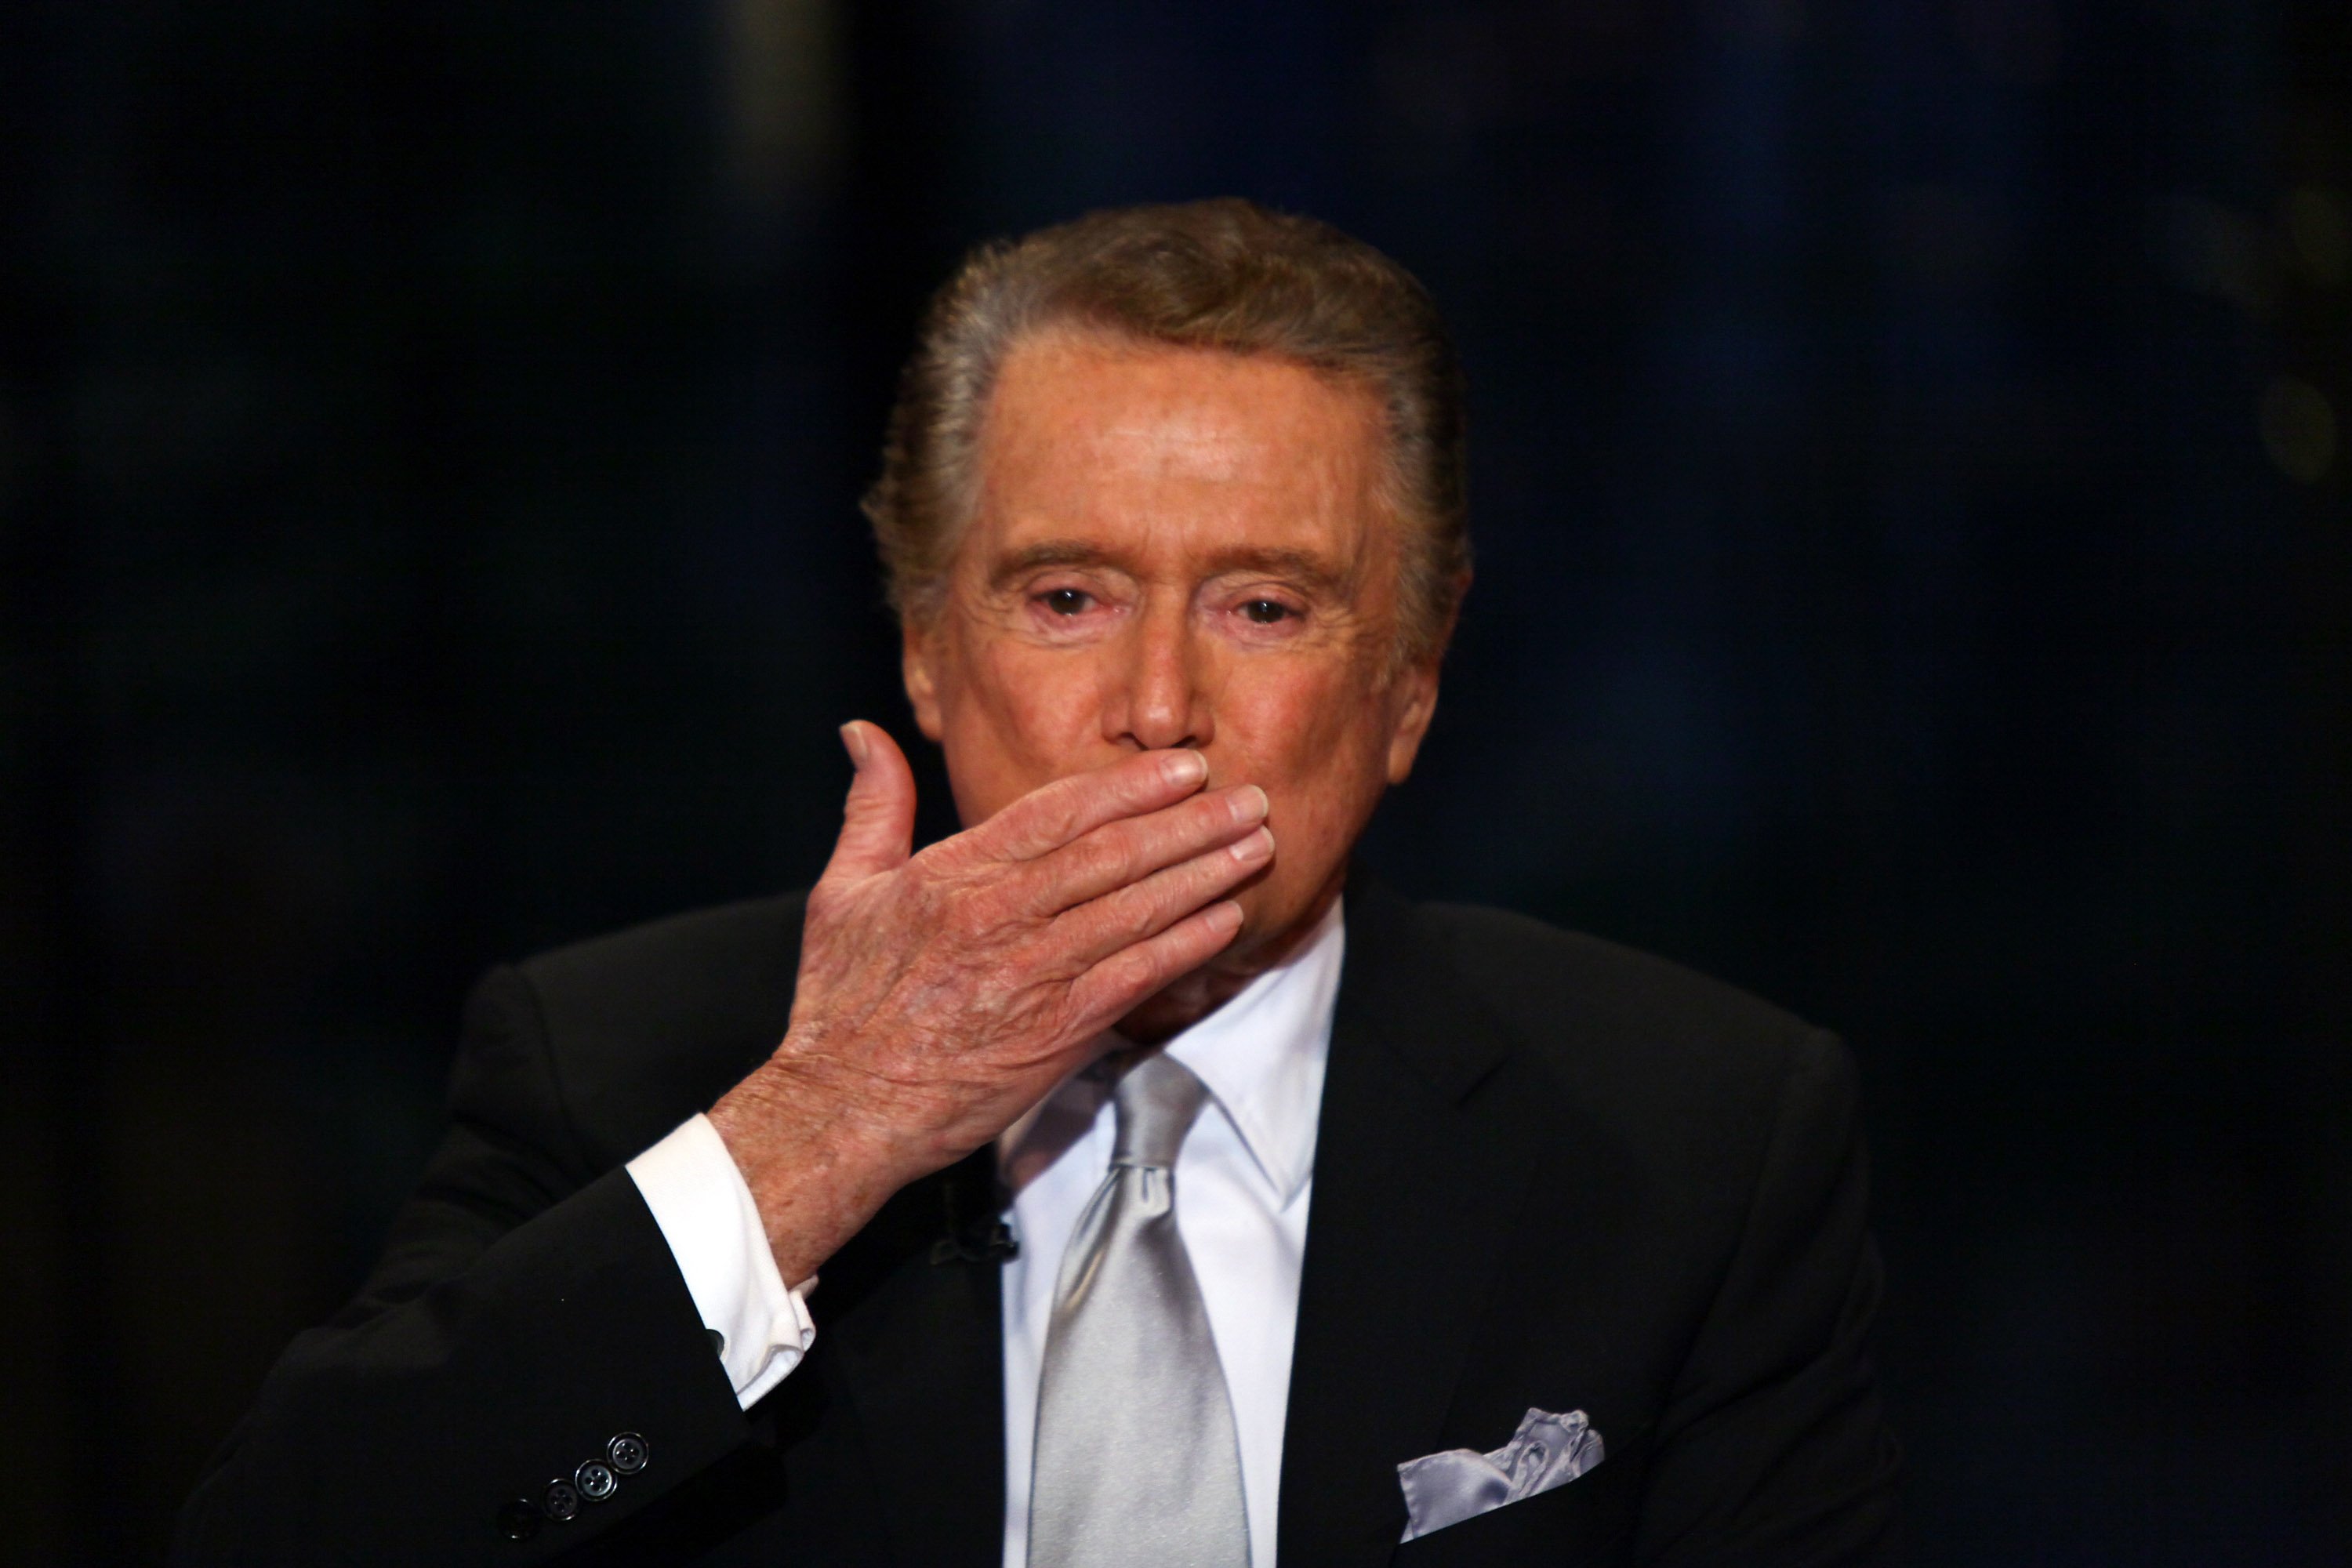 How Regis Philbin Said He Would Like to Be Remembered